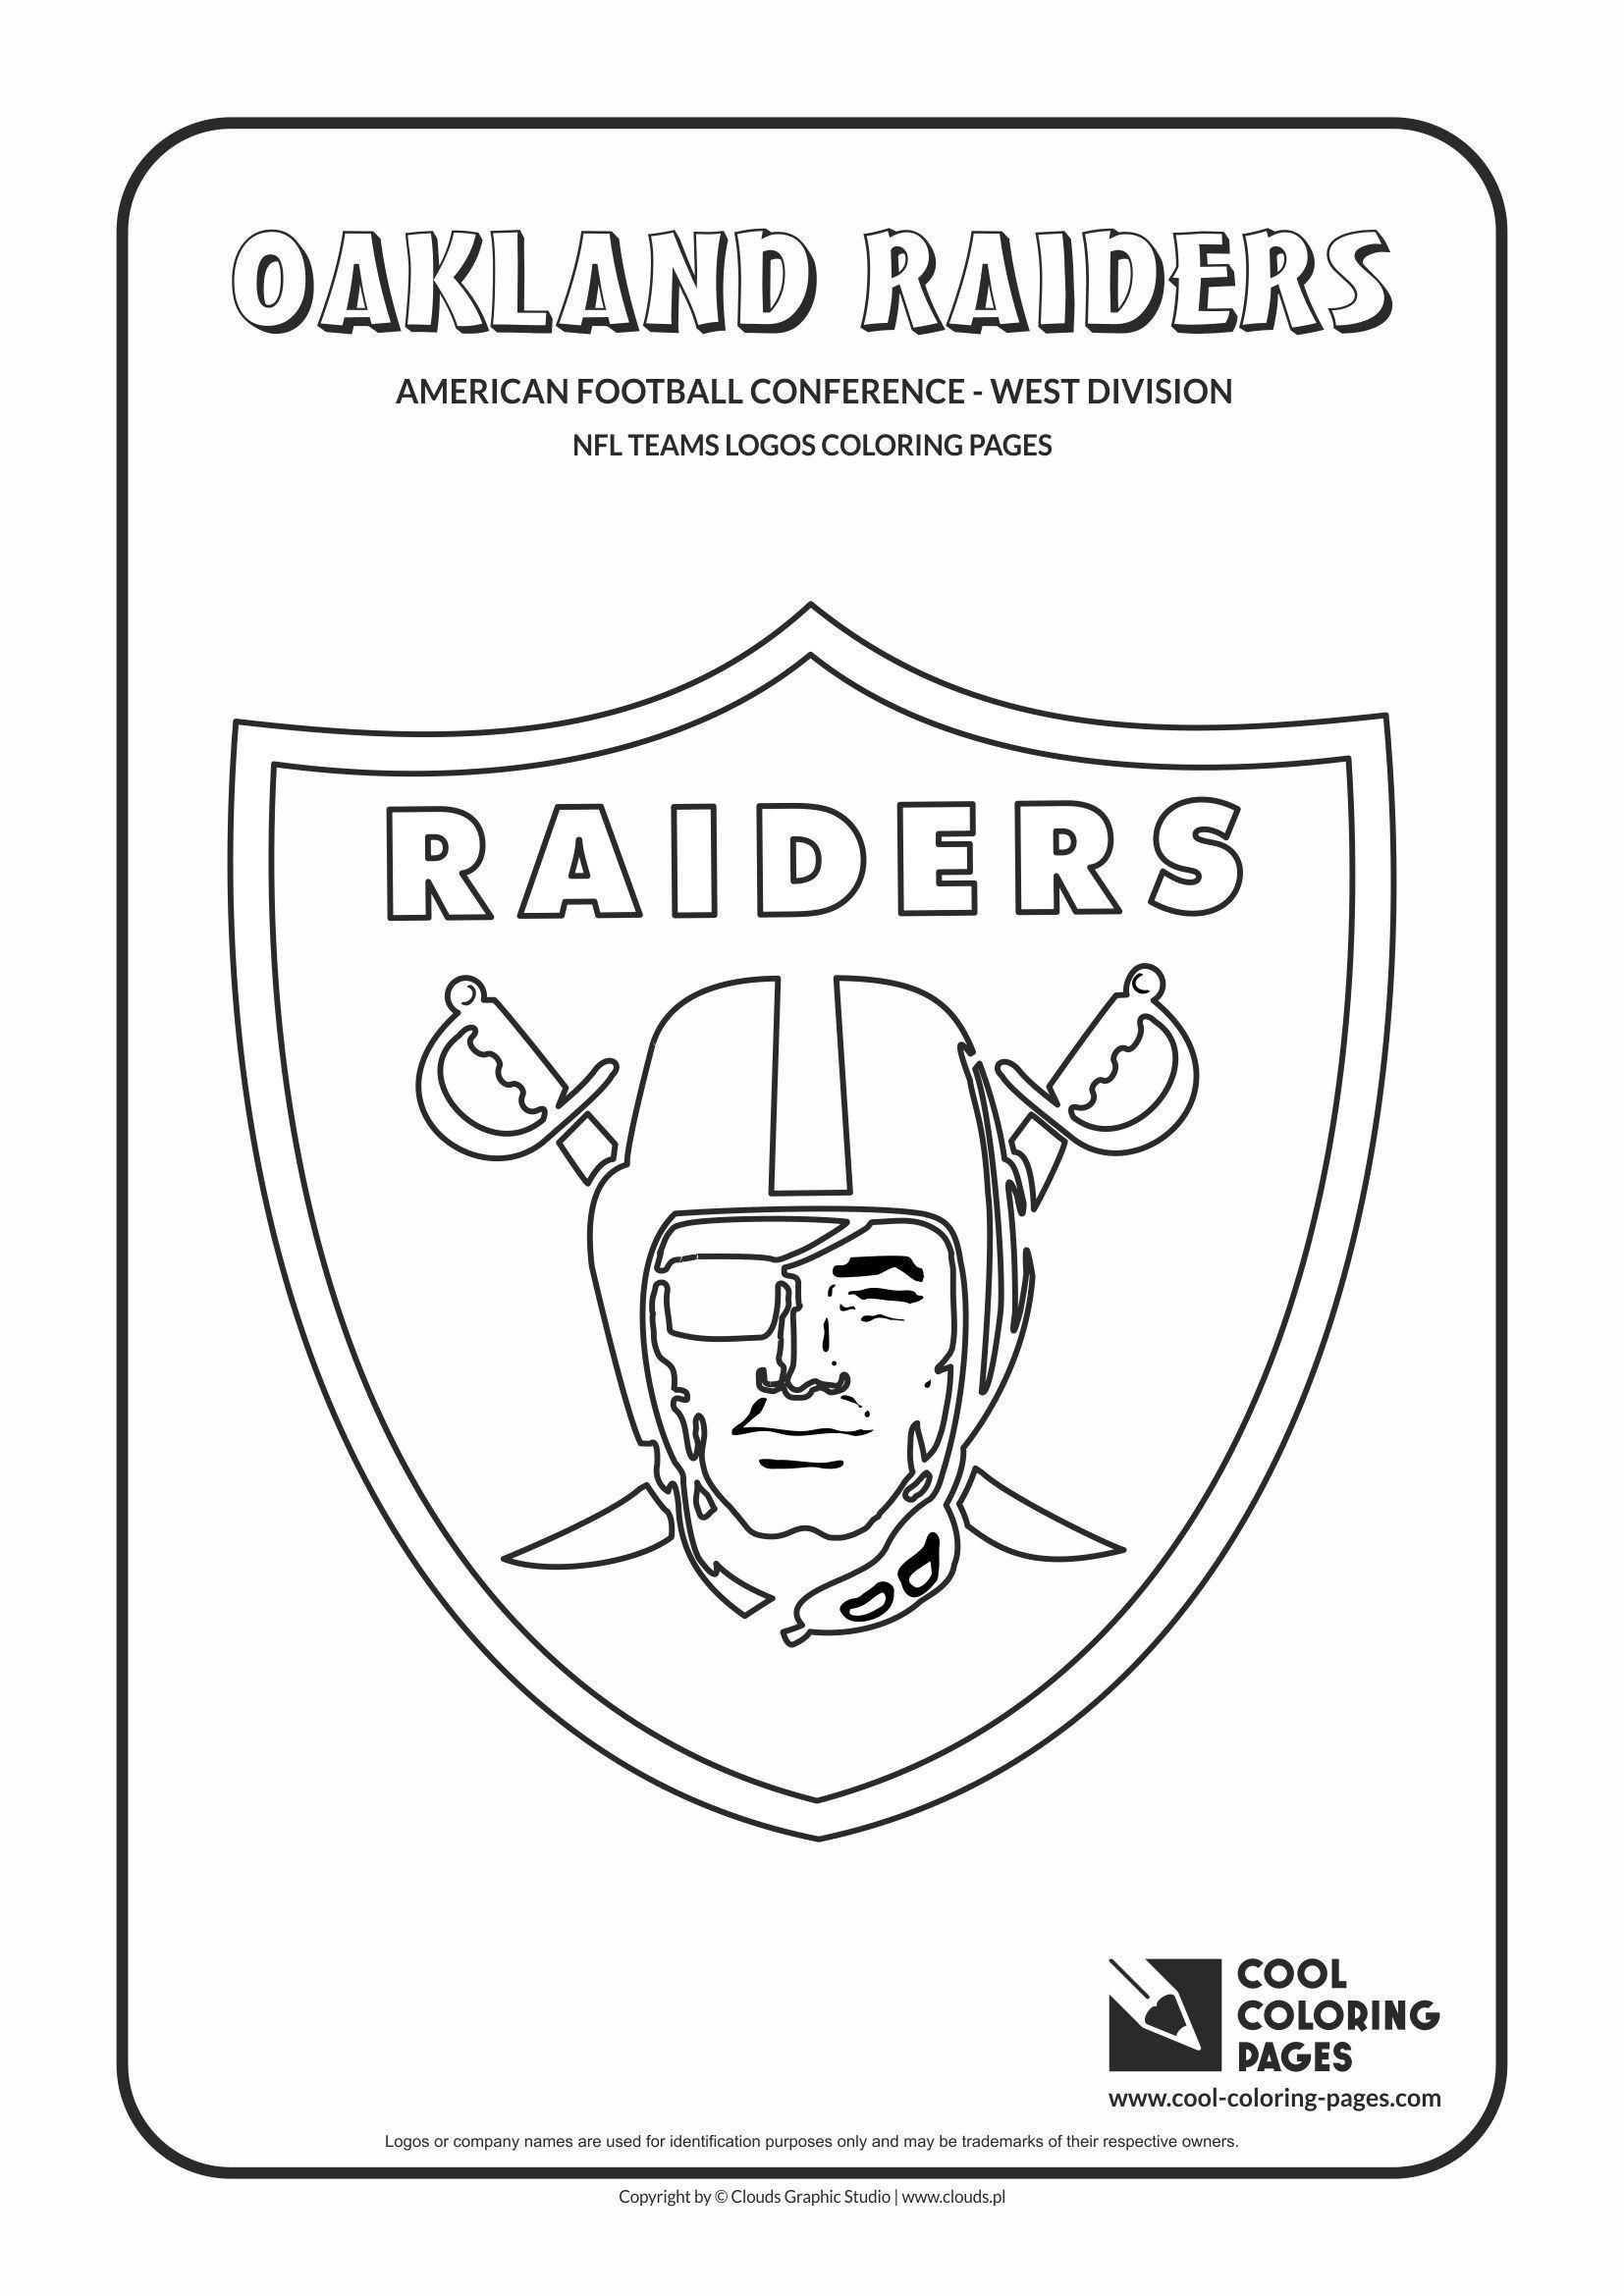 Cool NFL Team Logo - Nfl Team Logo Coloring Pages Cool NFL Teams Logos - itc-info.us